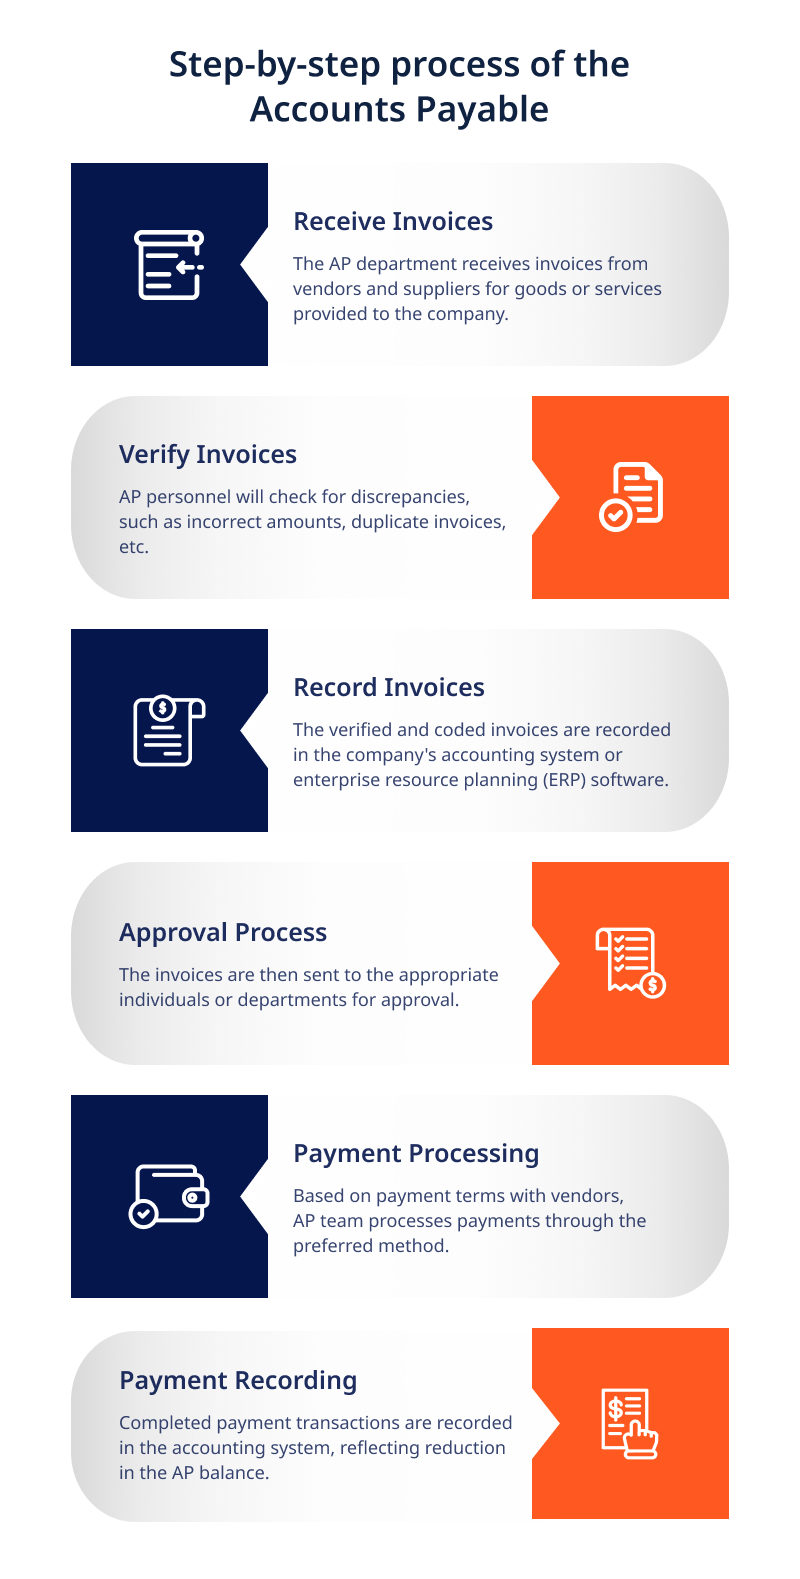 Step-by-step process of the Accounts Payable